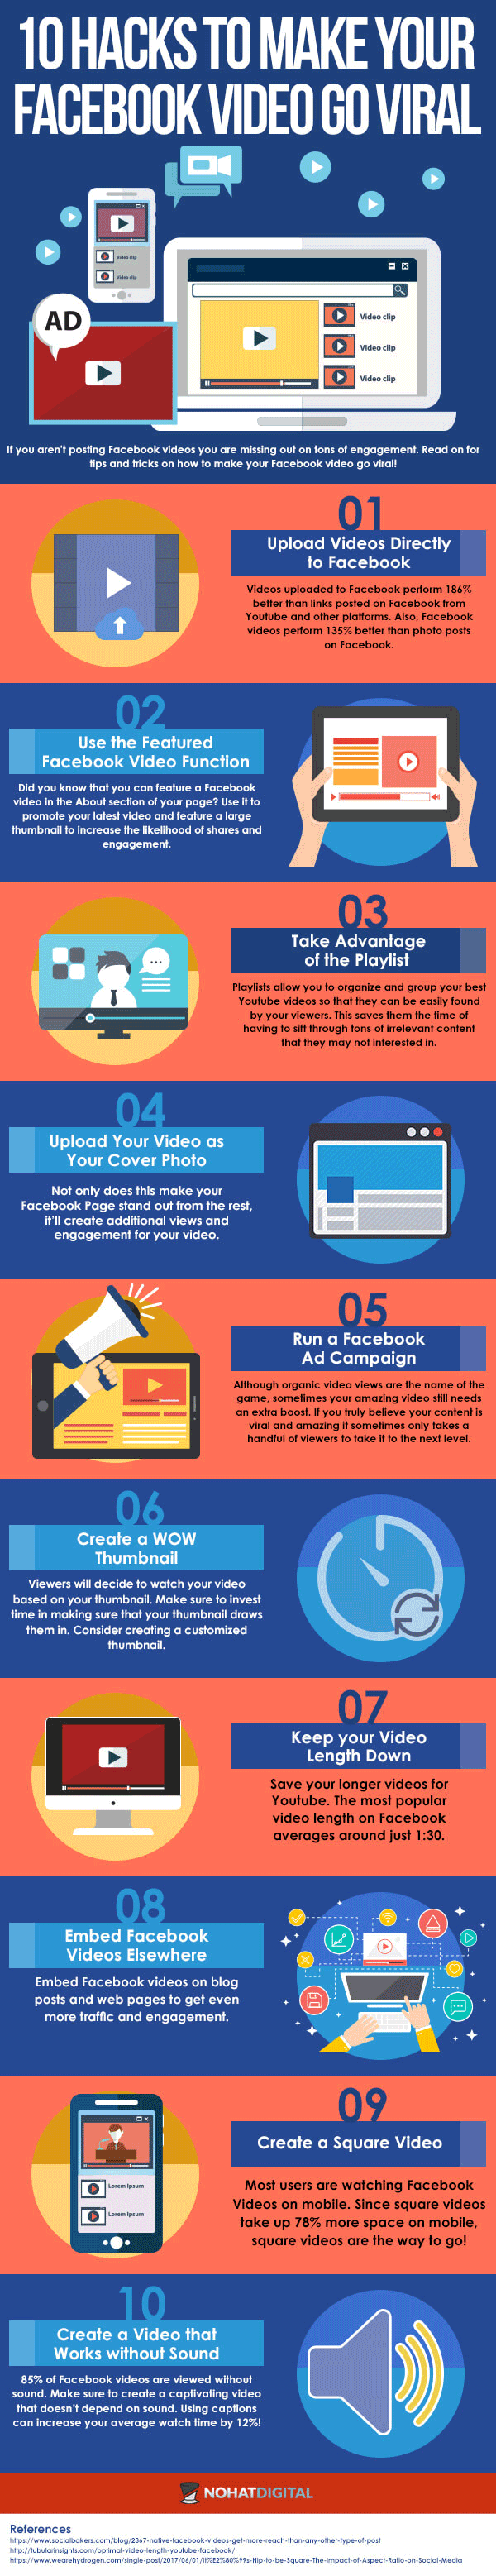 10 hacks to make your Facebook video go viral infographic